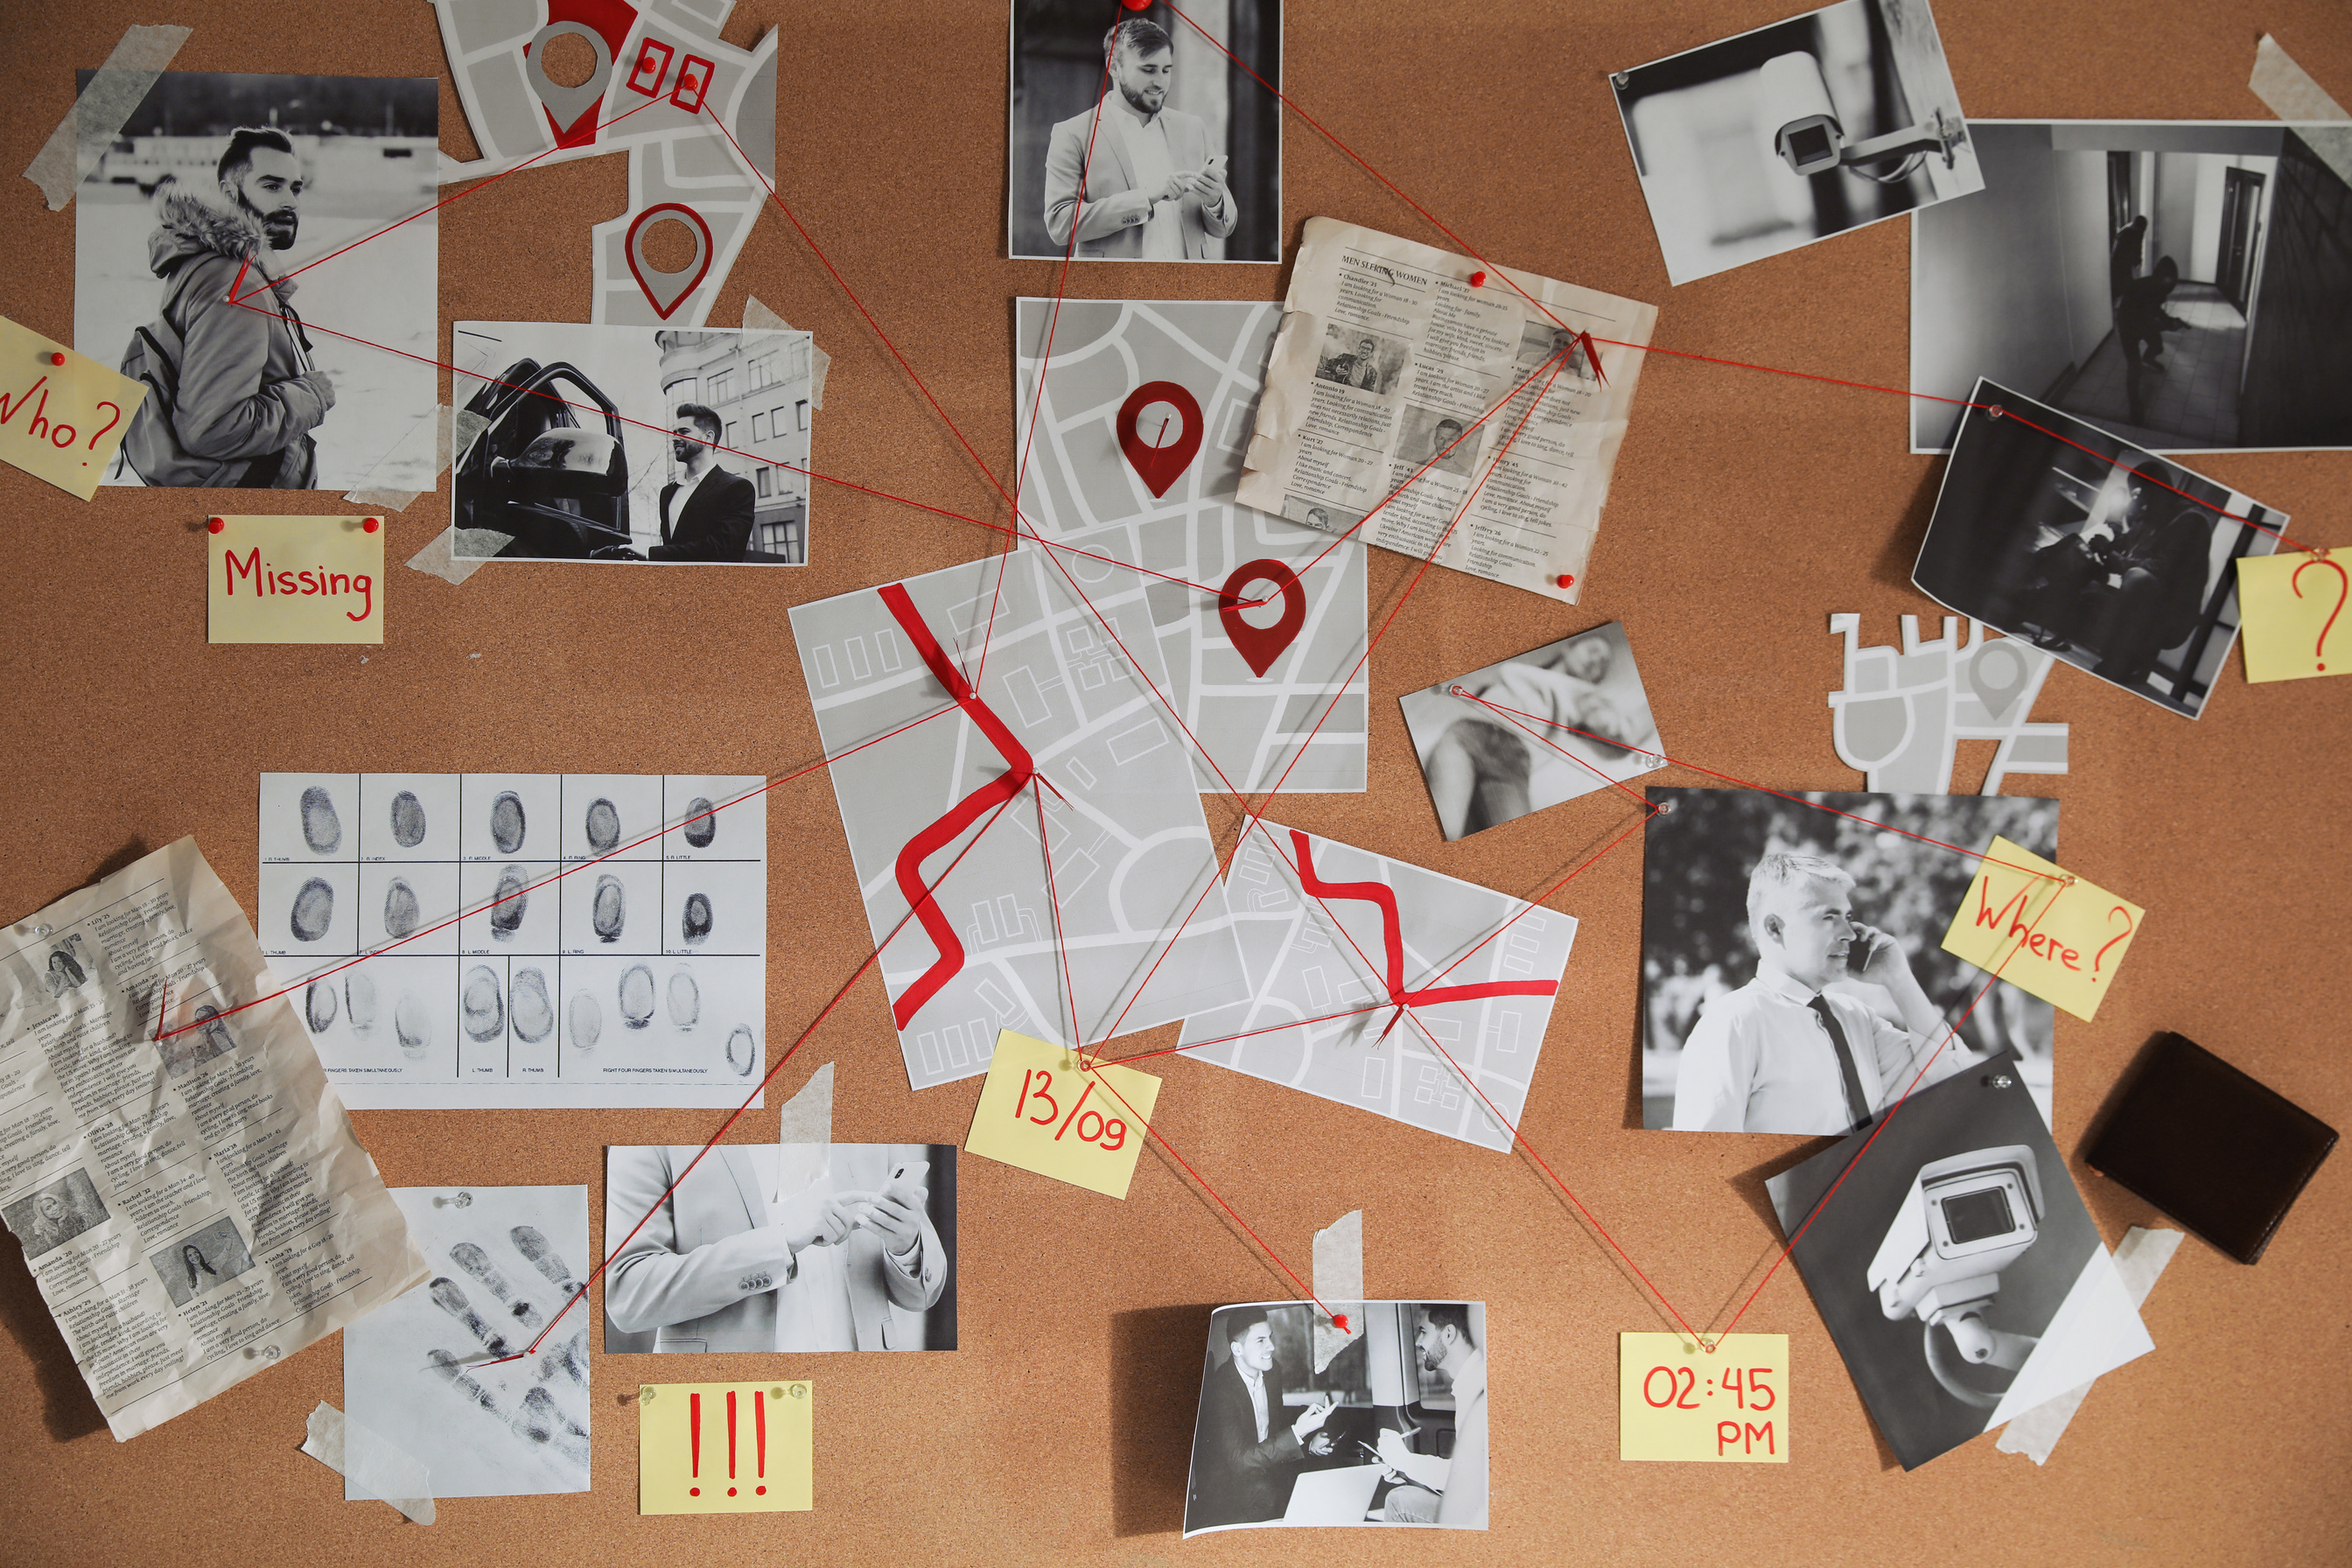 Detective Board with Crime Scene Photos and Red Threads, Closeup